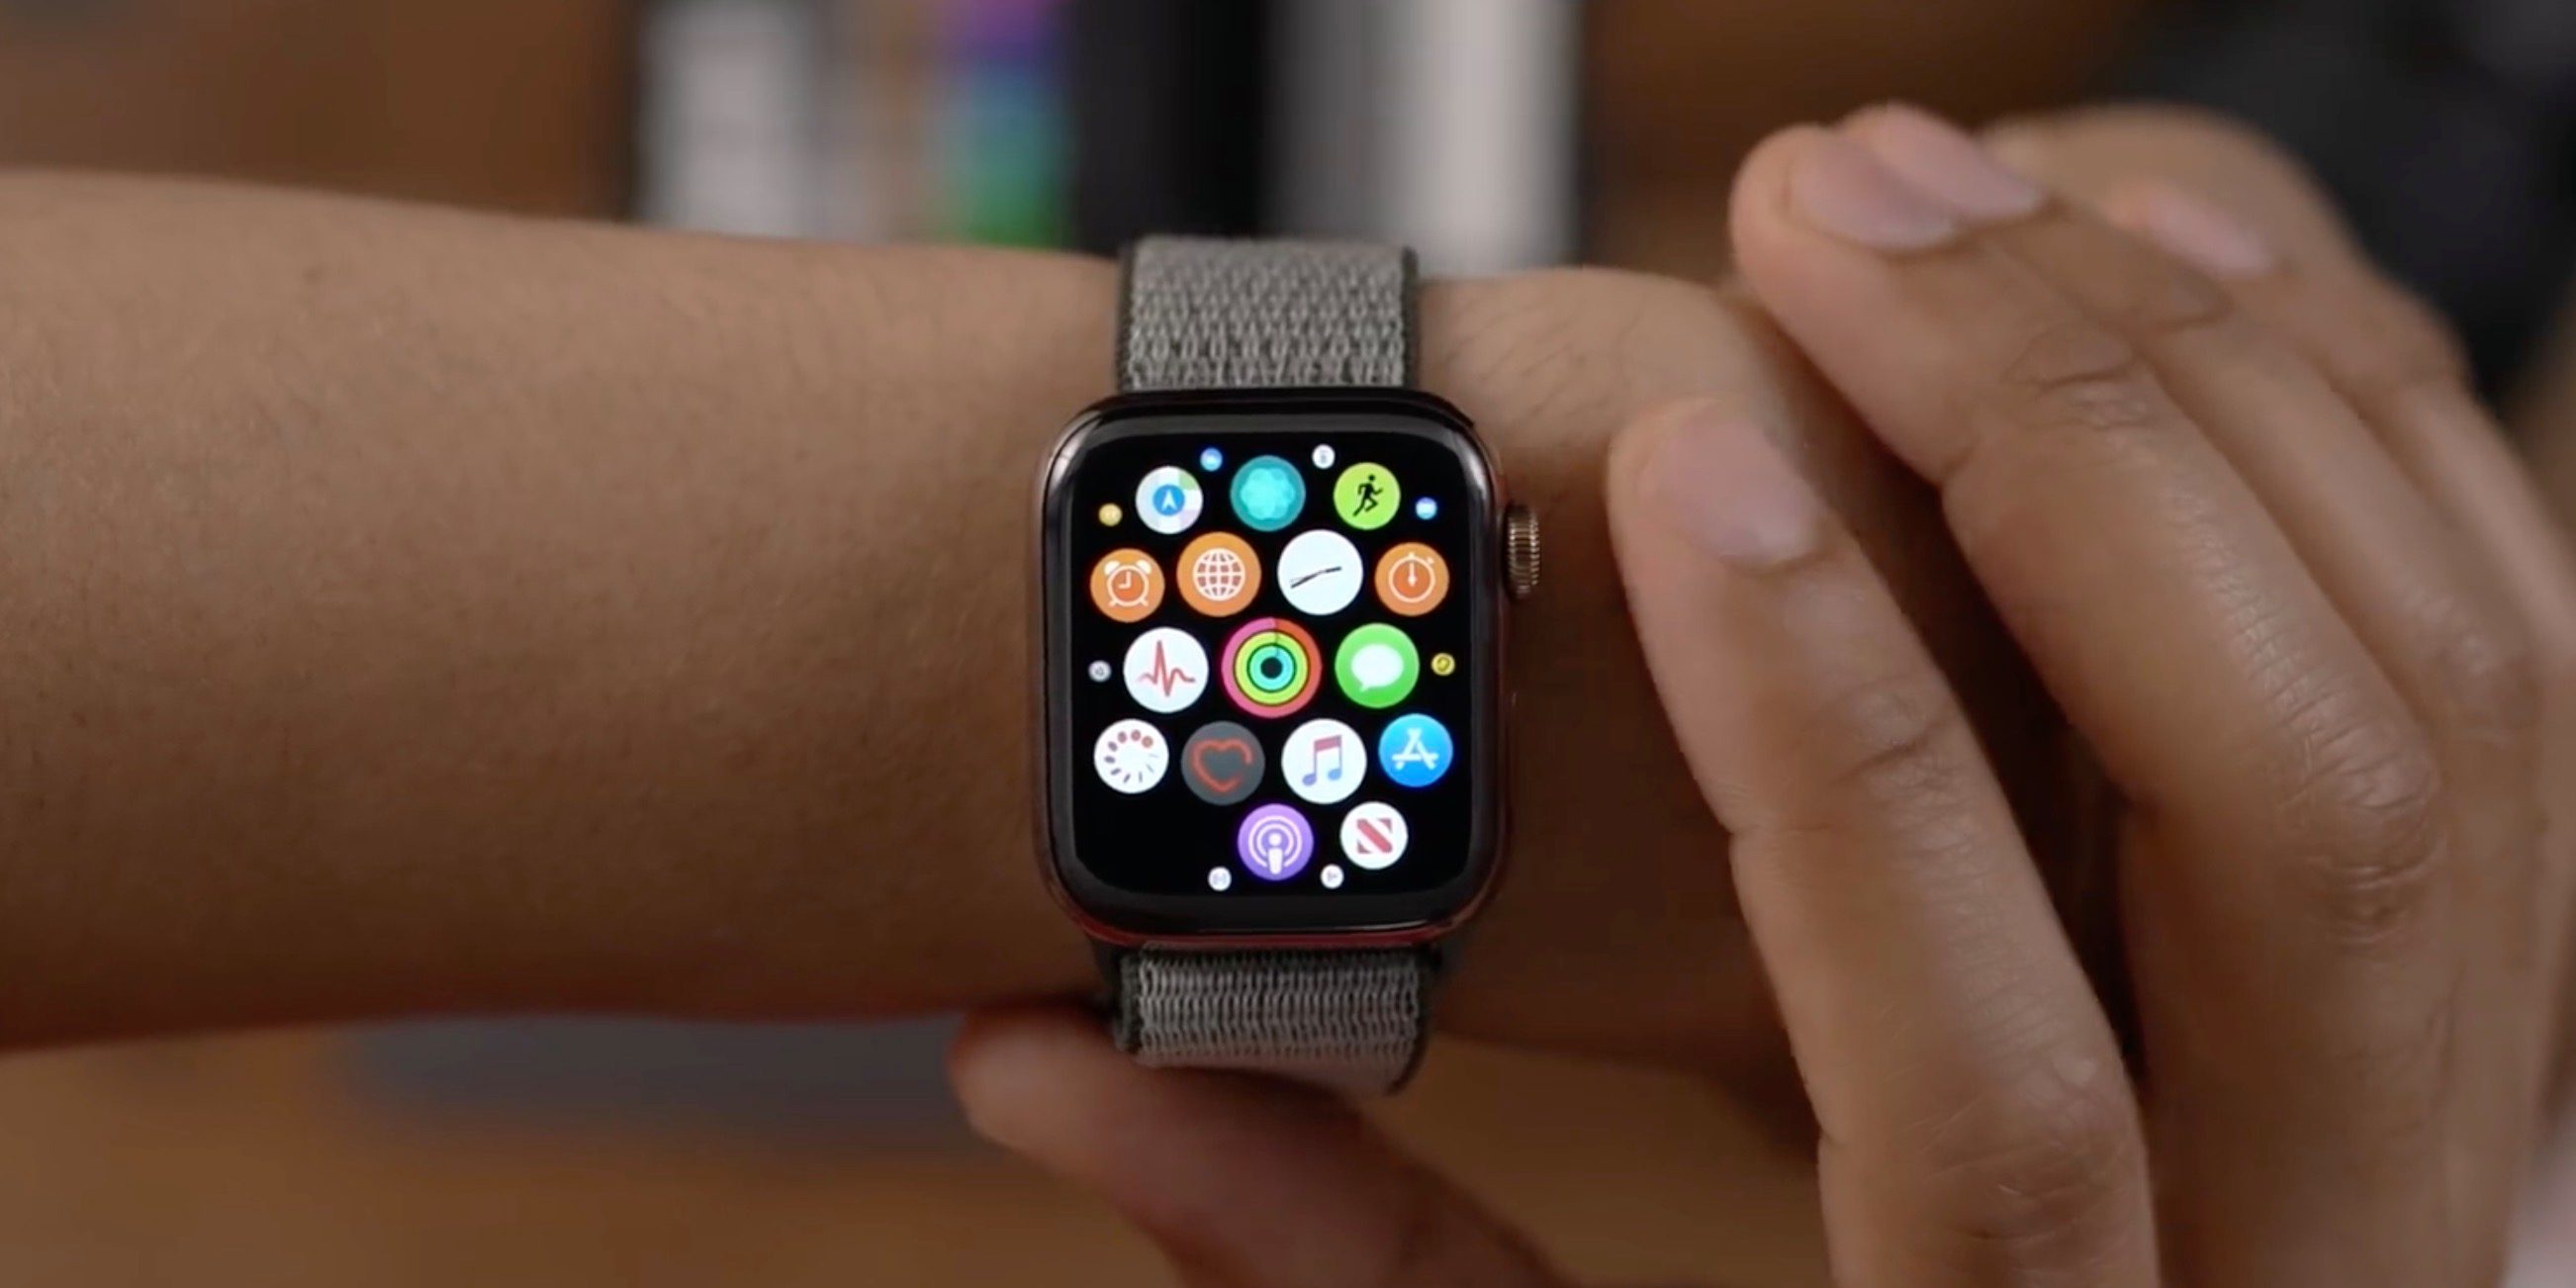 Apple Watch Features, specs, release dates, more 9to5Mac